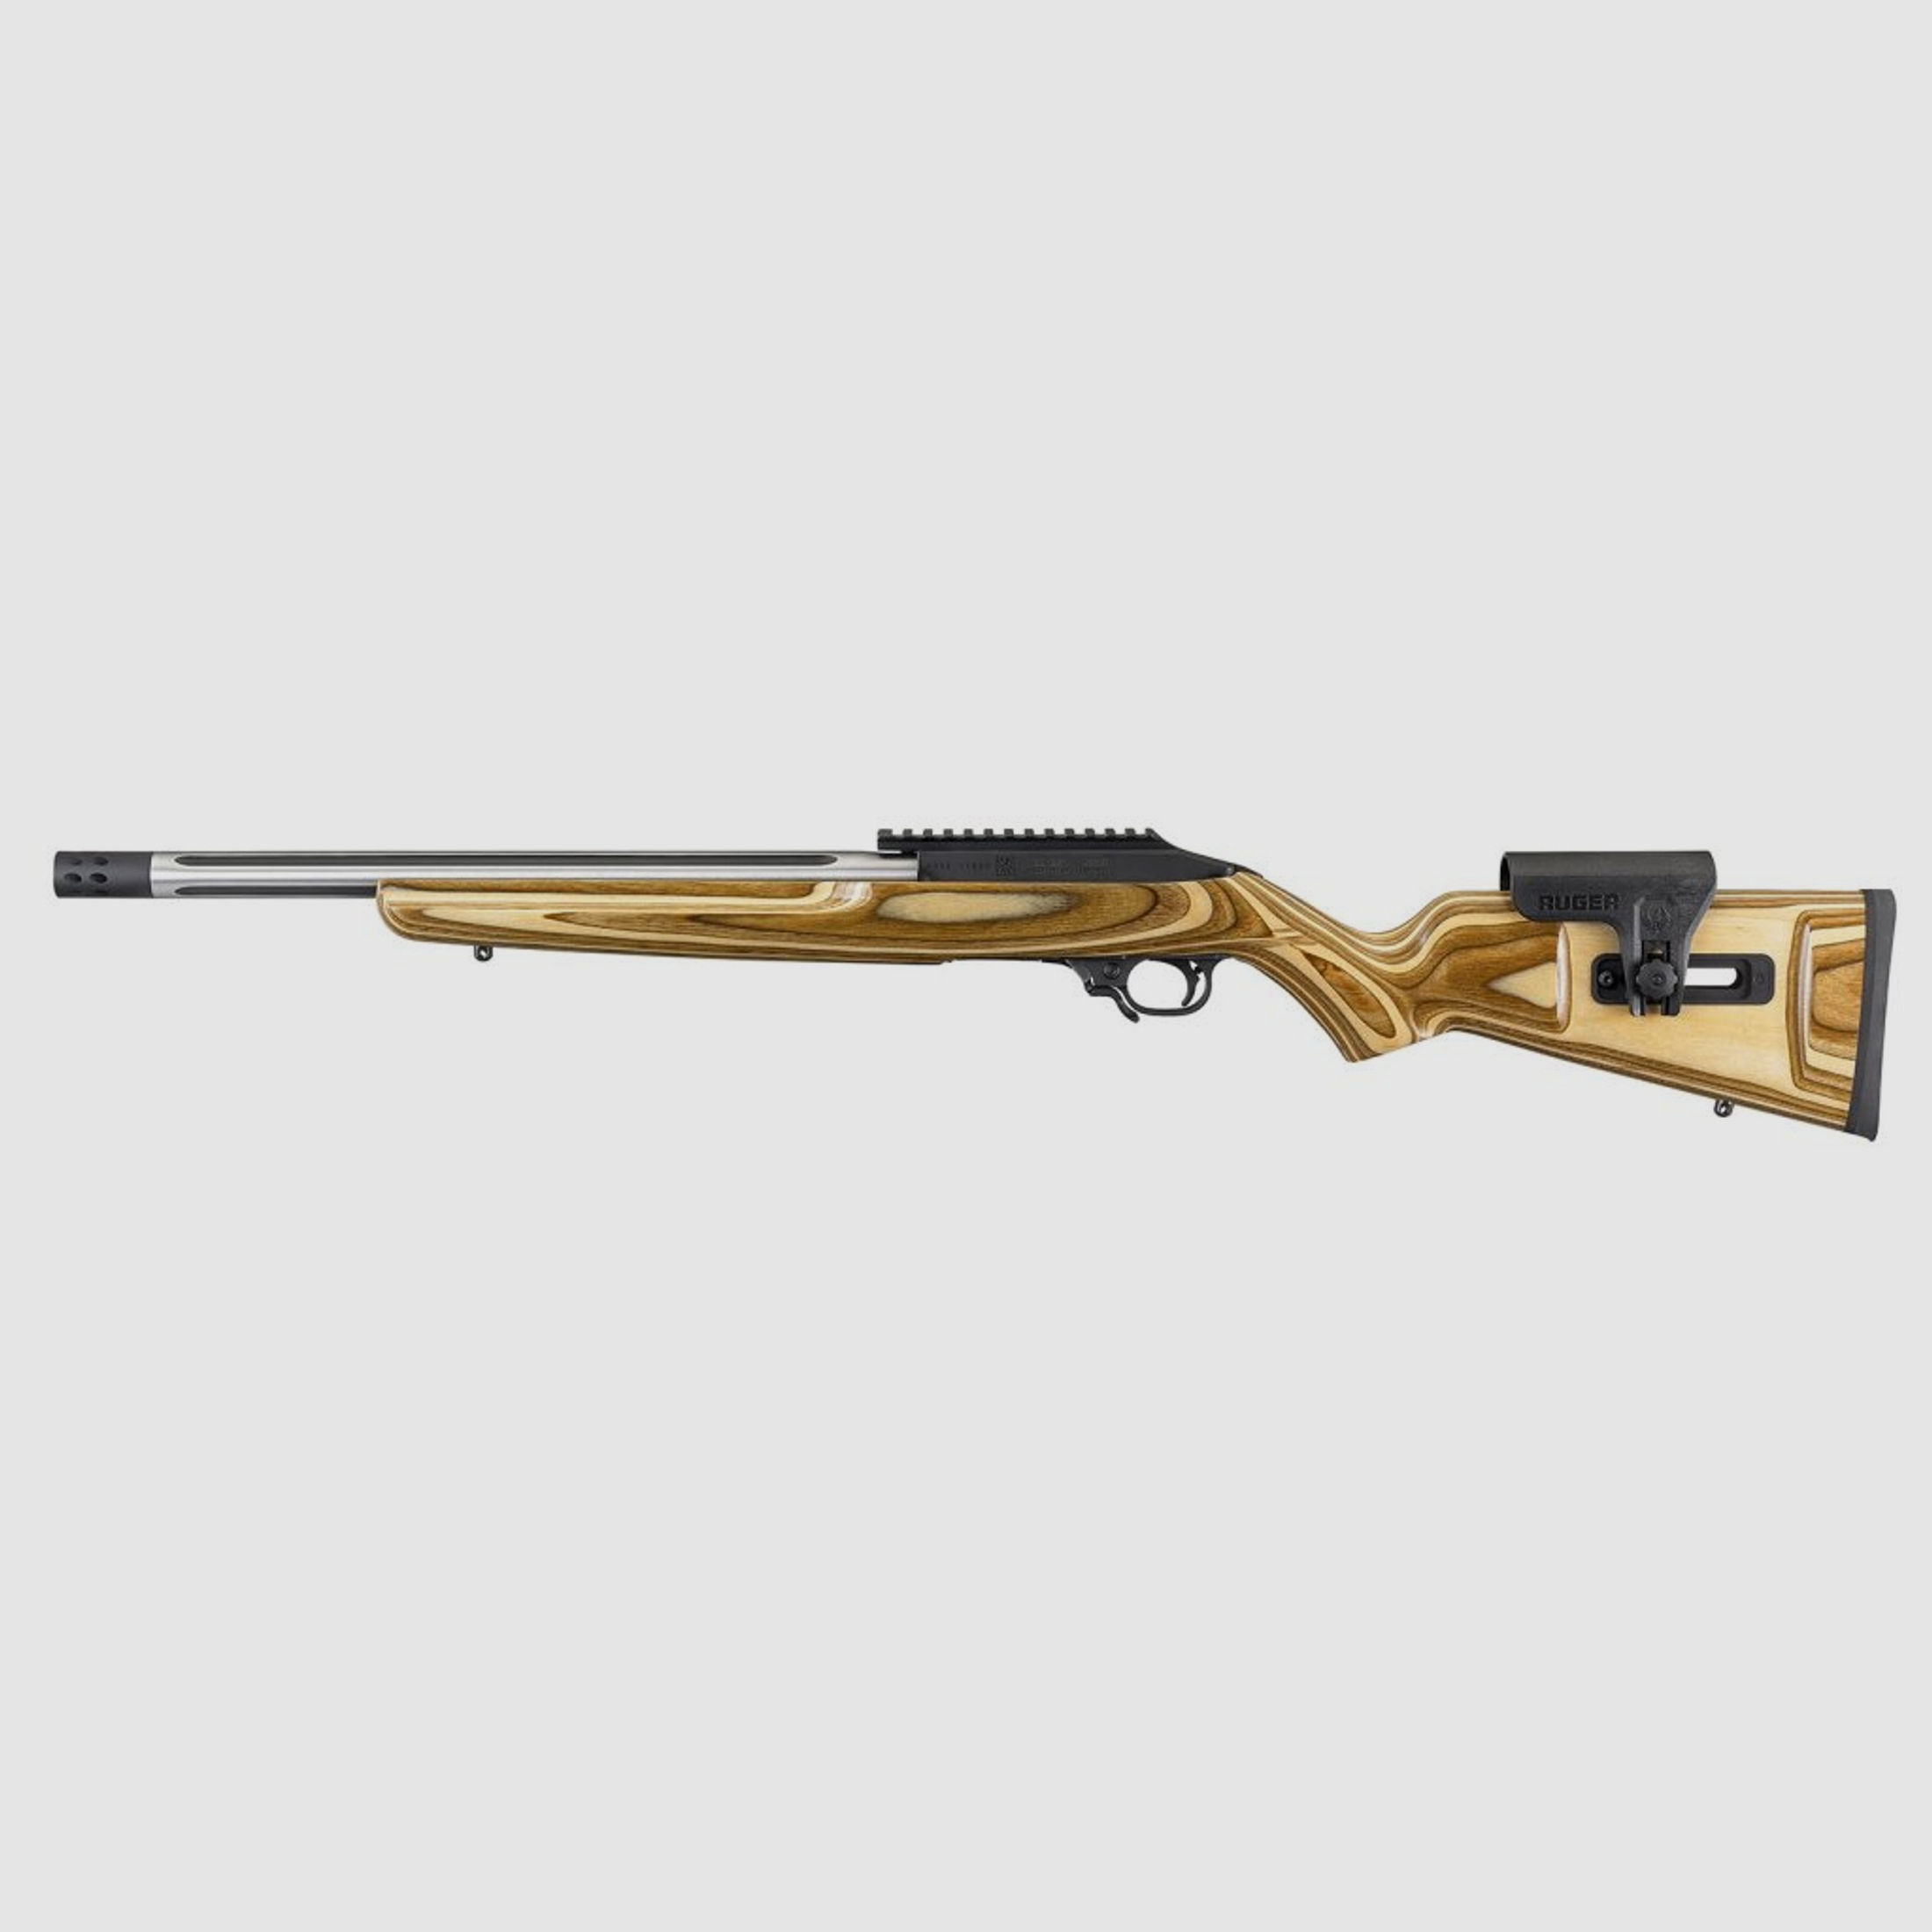 RUGER 10/22 Competition Brown .22l.r.